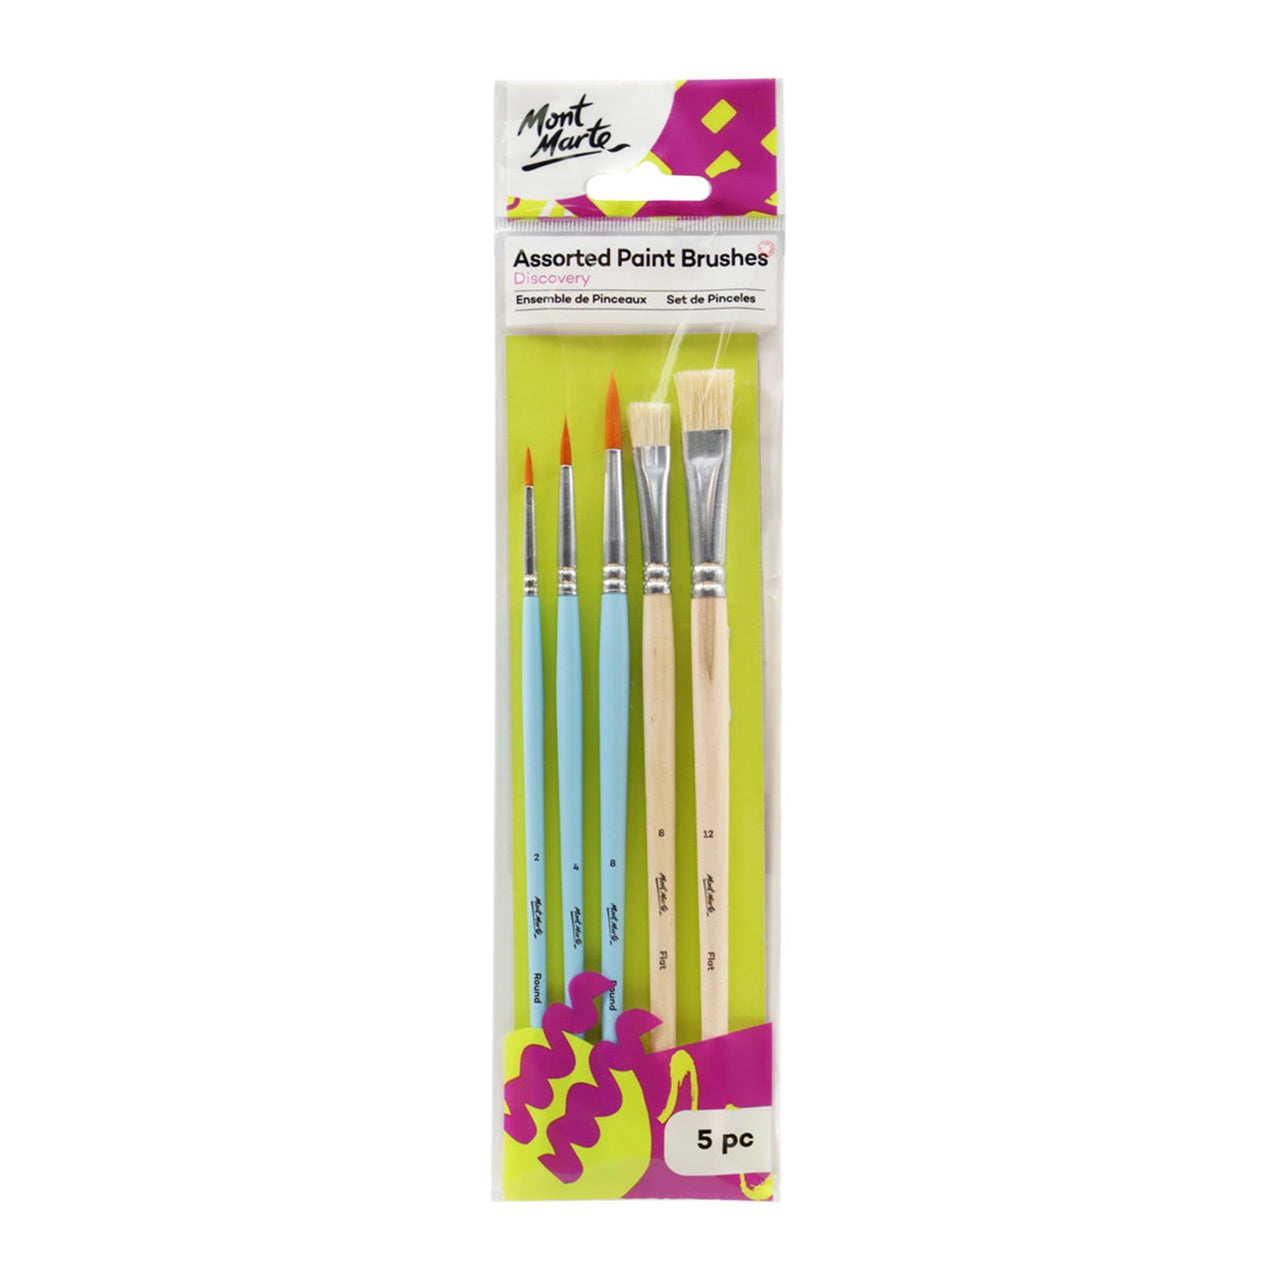 Mont Marte Assorted Paint Brushes 5pc